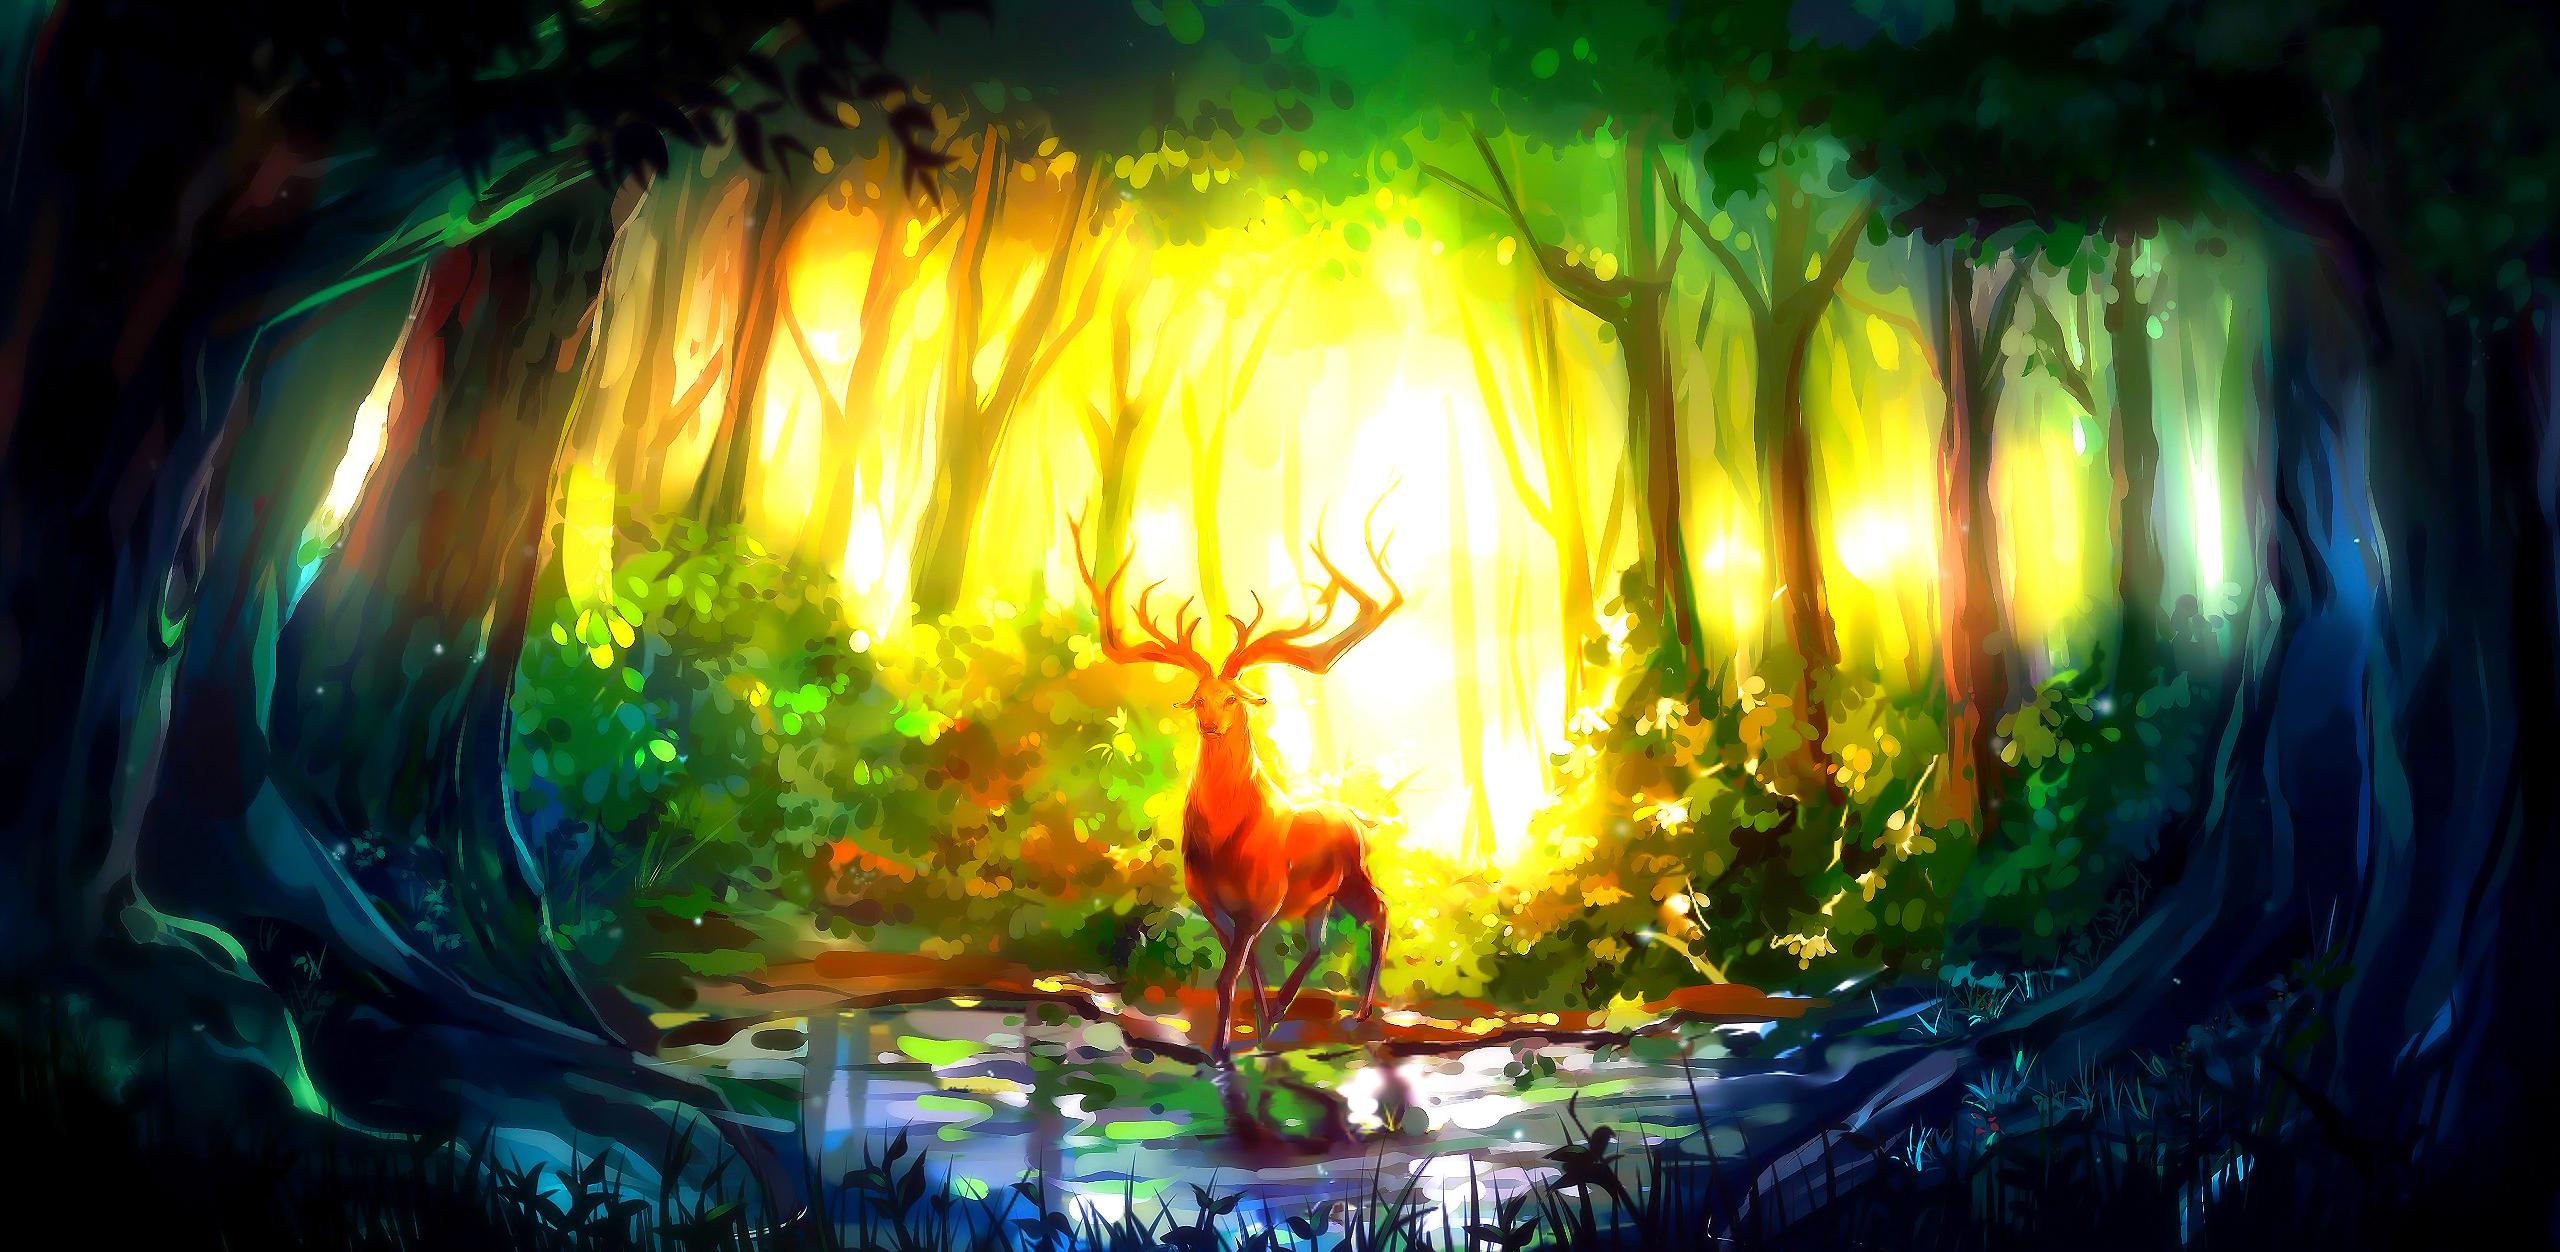 Forest spirit - - High Quality and Resolution Wallpapers